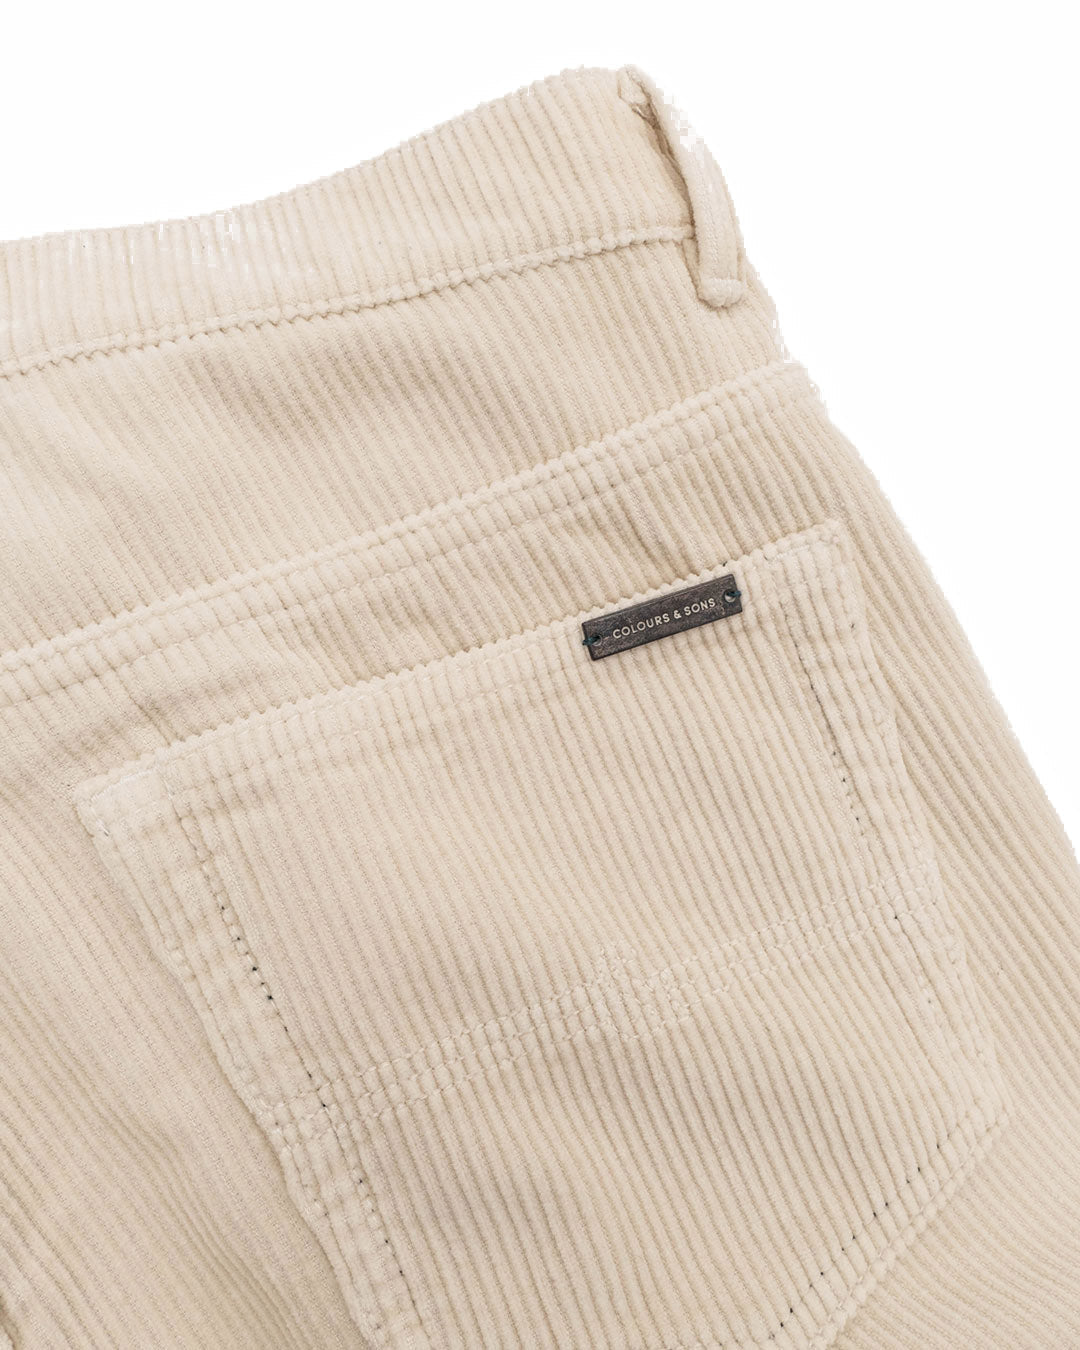 Cargo Corduroy Cropped in Wood Ash Hosen Colours and Sons   